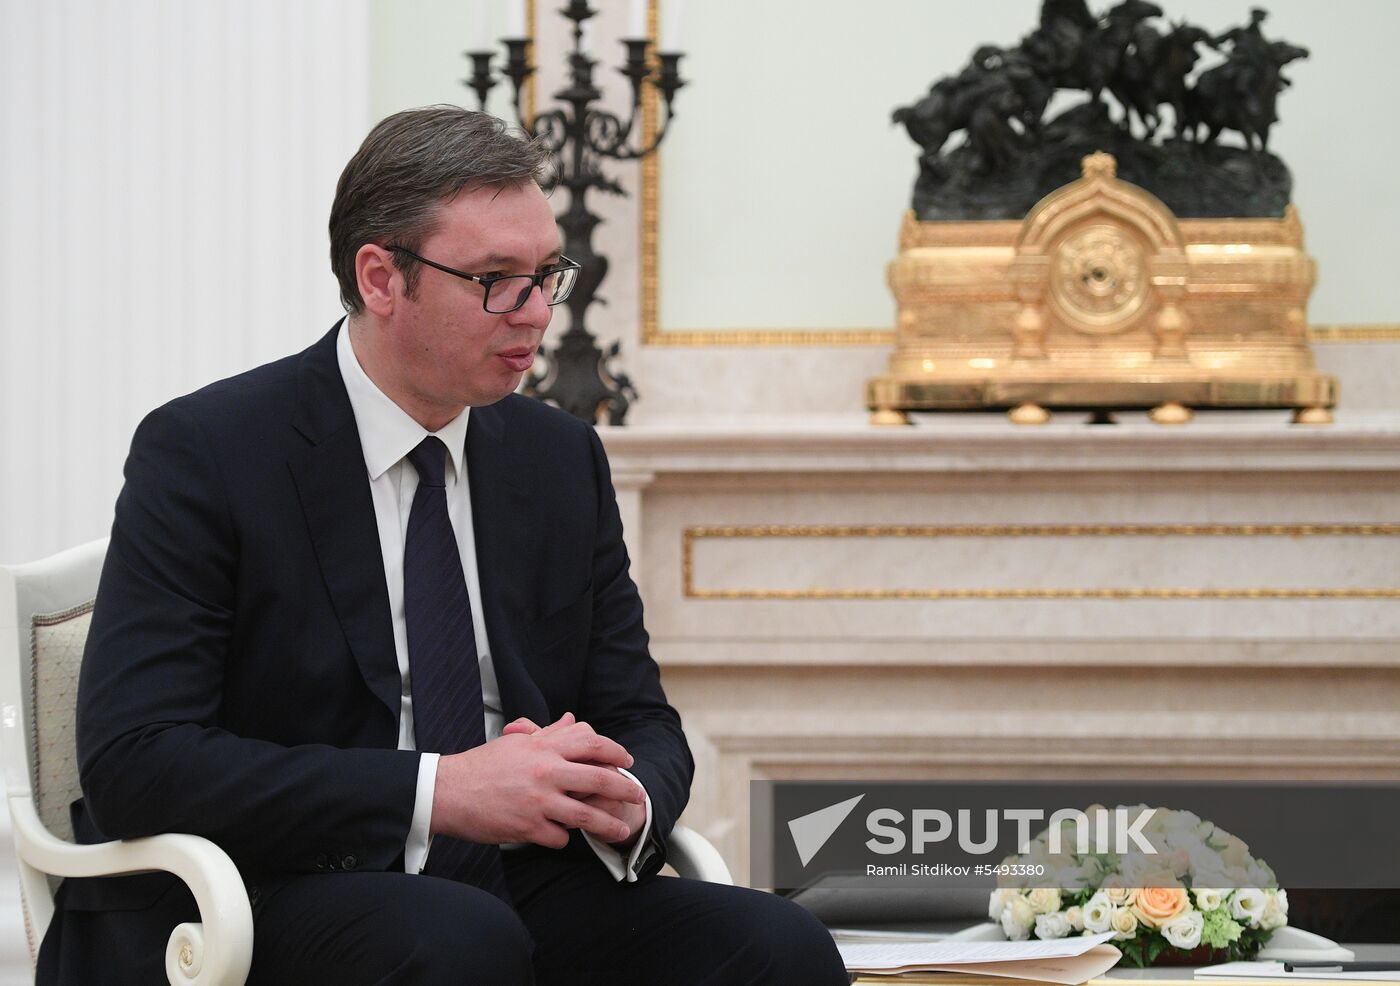 President Putin meets with Serbian Persident Vucic